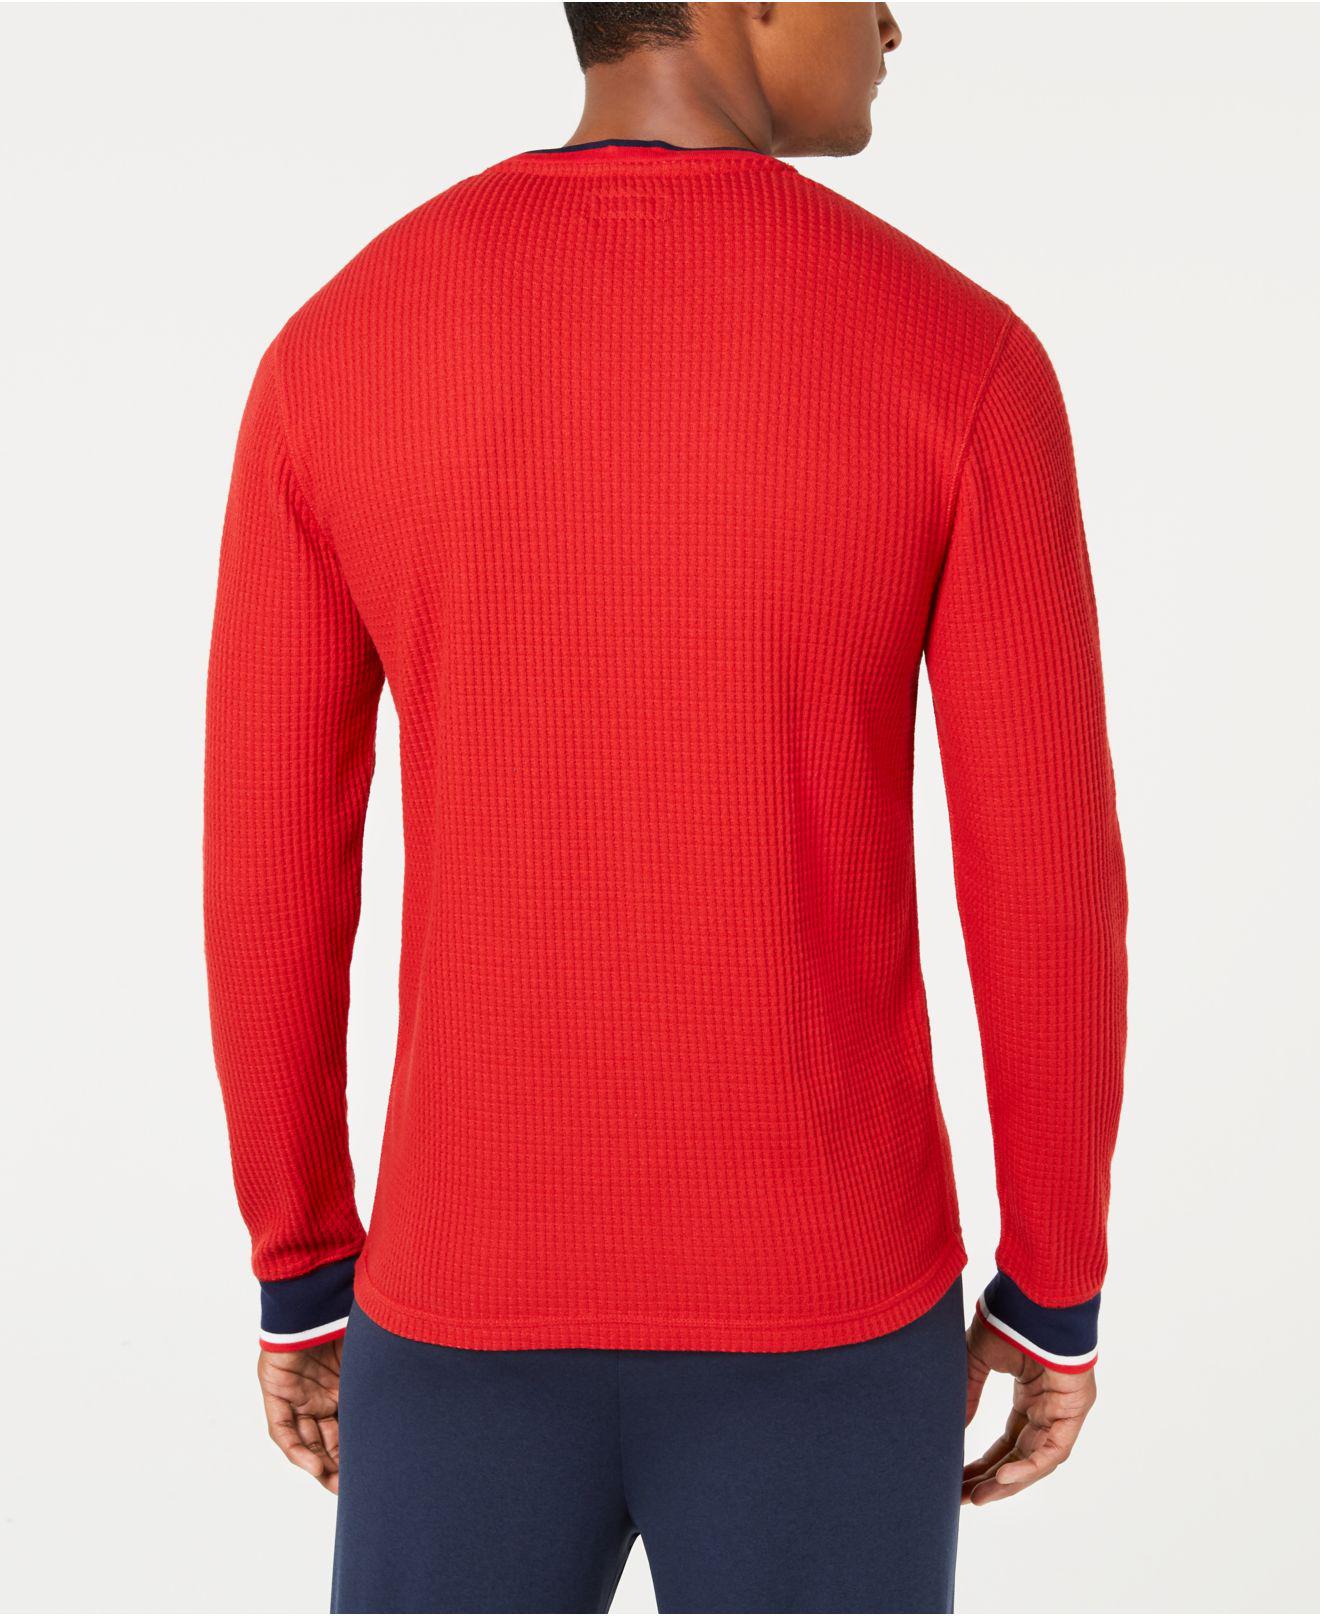 Polo Ralph Lauren Open Weave Waffle-knit Thermal in Red for Men - Lyst